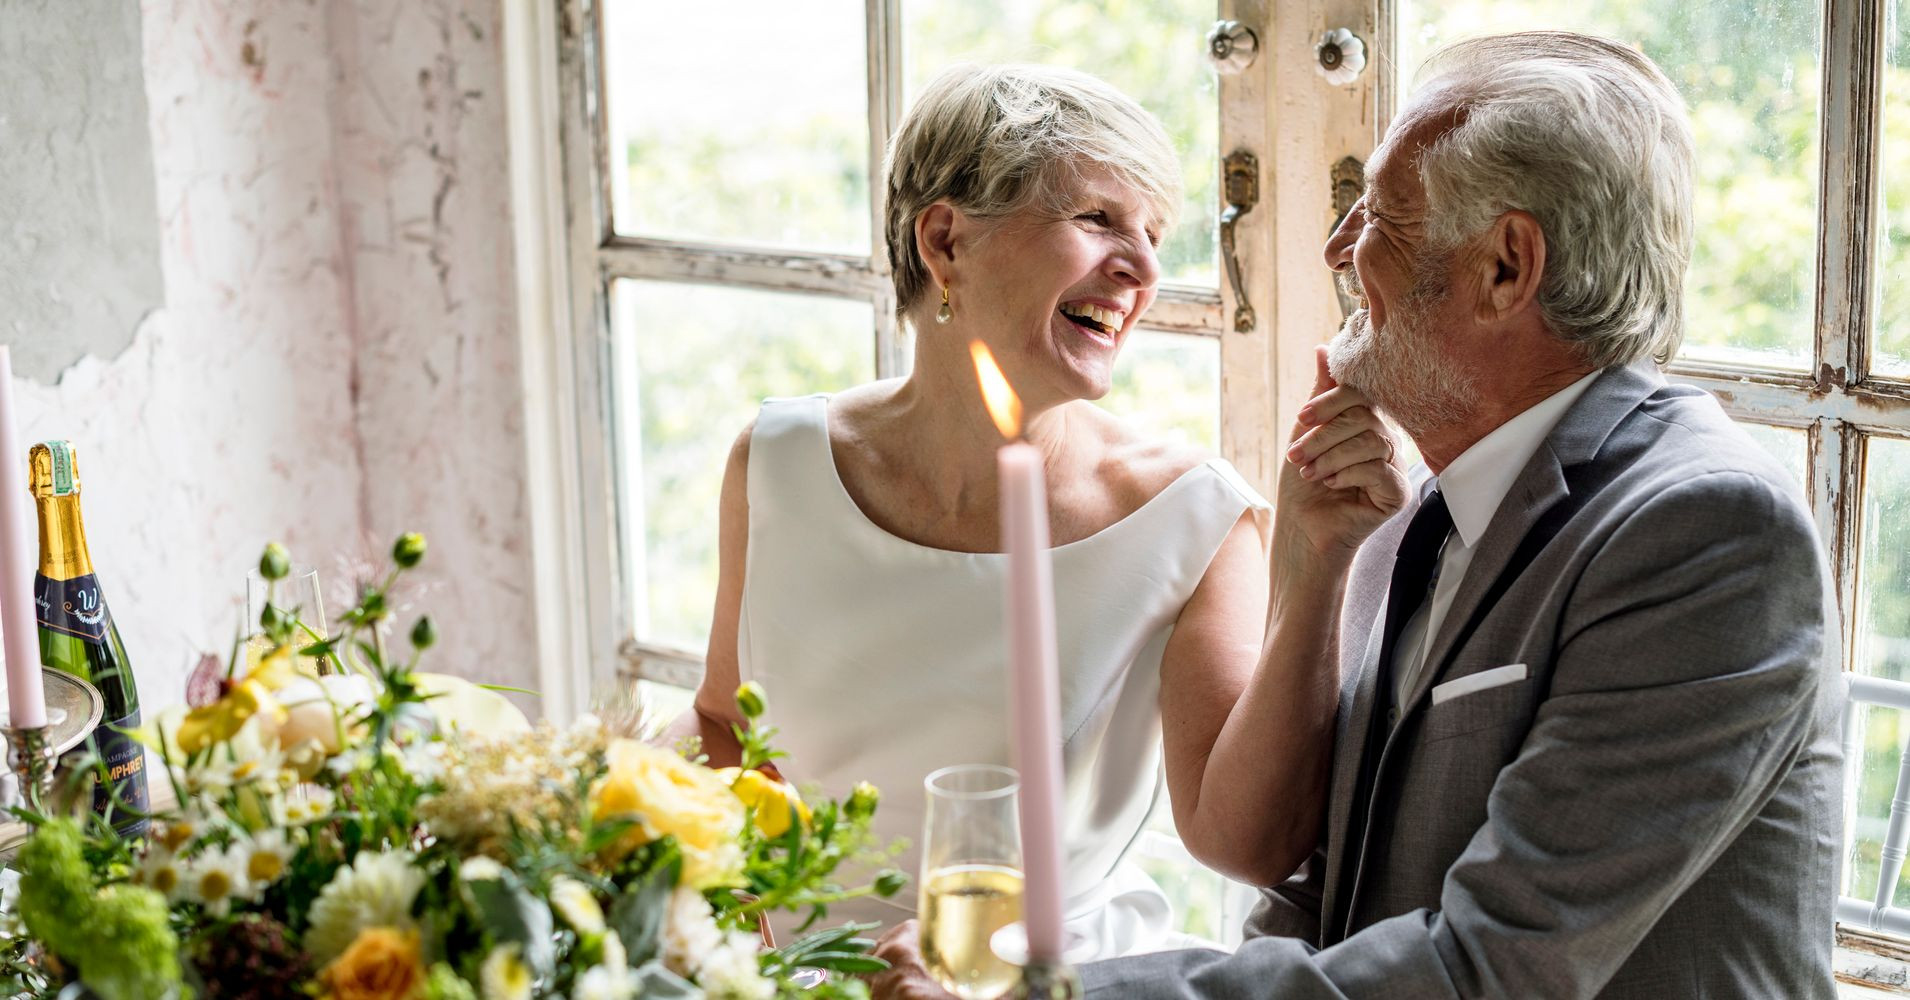 Wedding Gift Ideas For Older Couple
 27 Wedding Gifts For Older Couples Marrying The Second